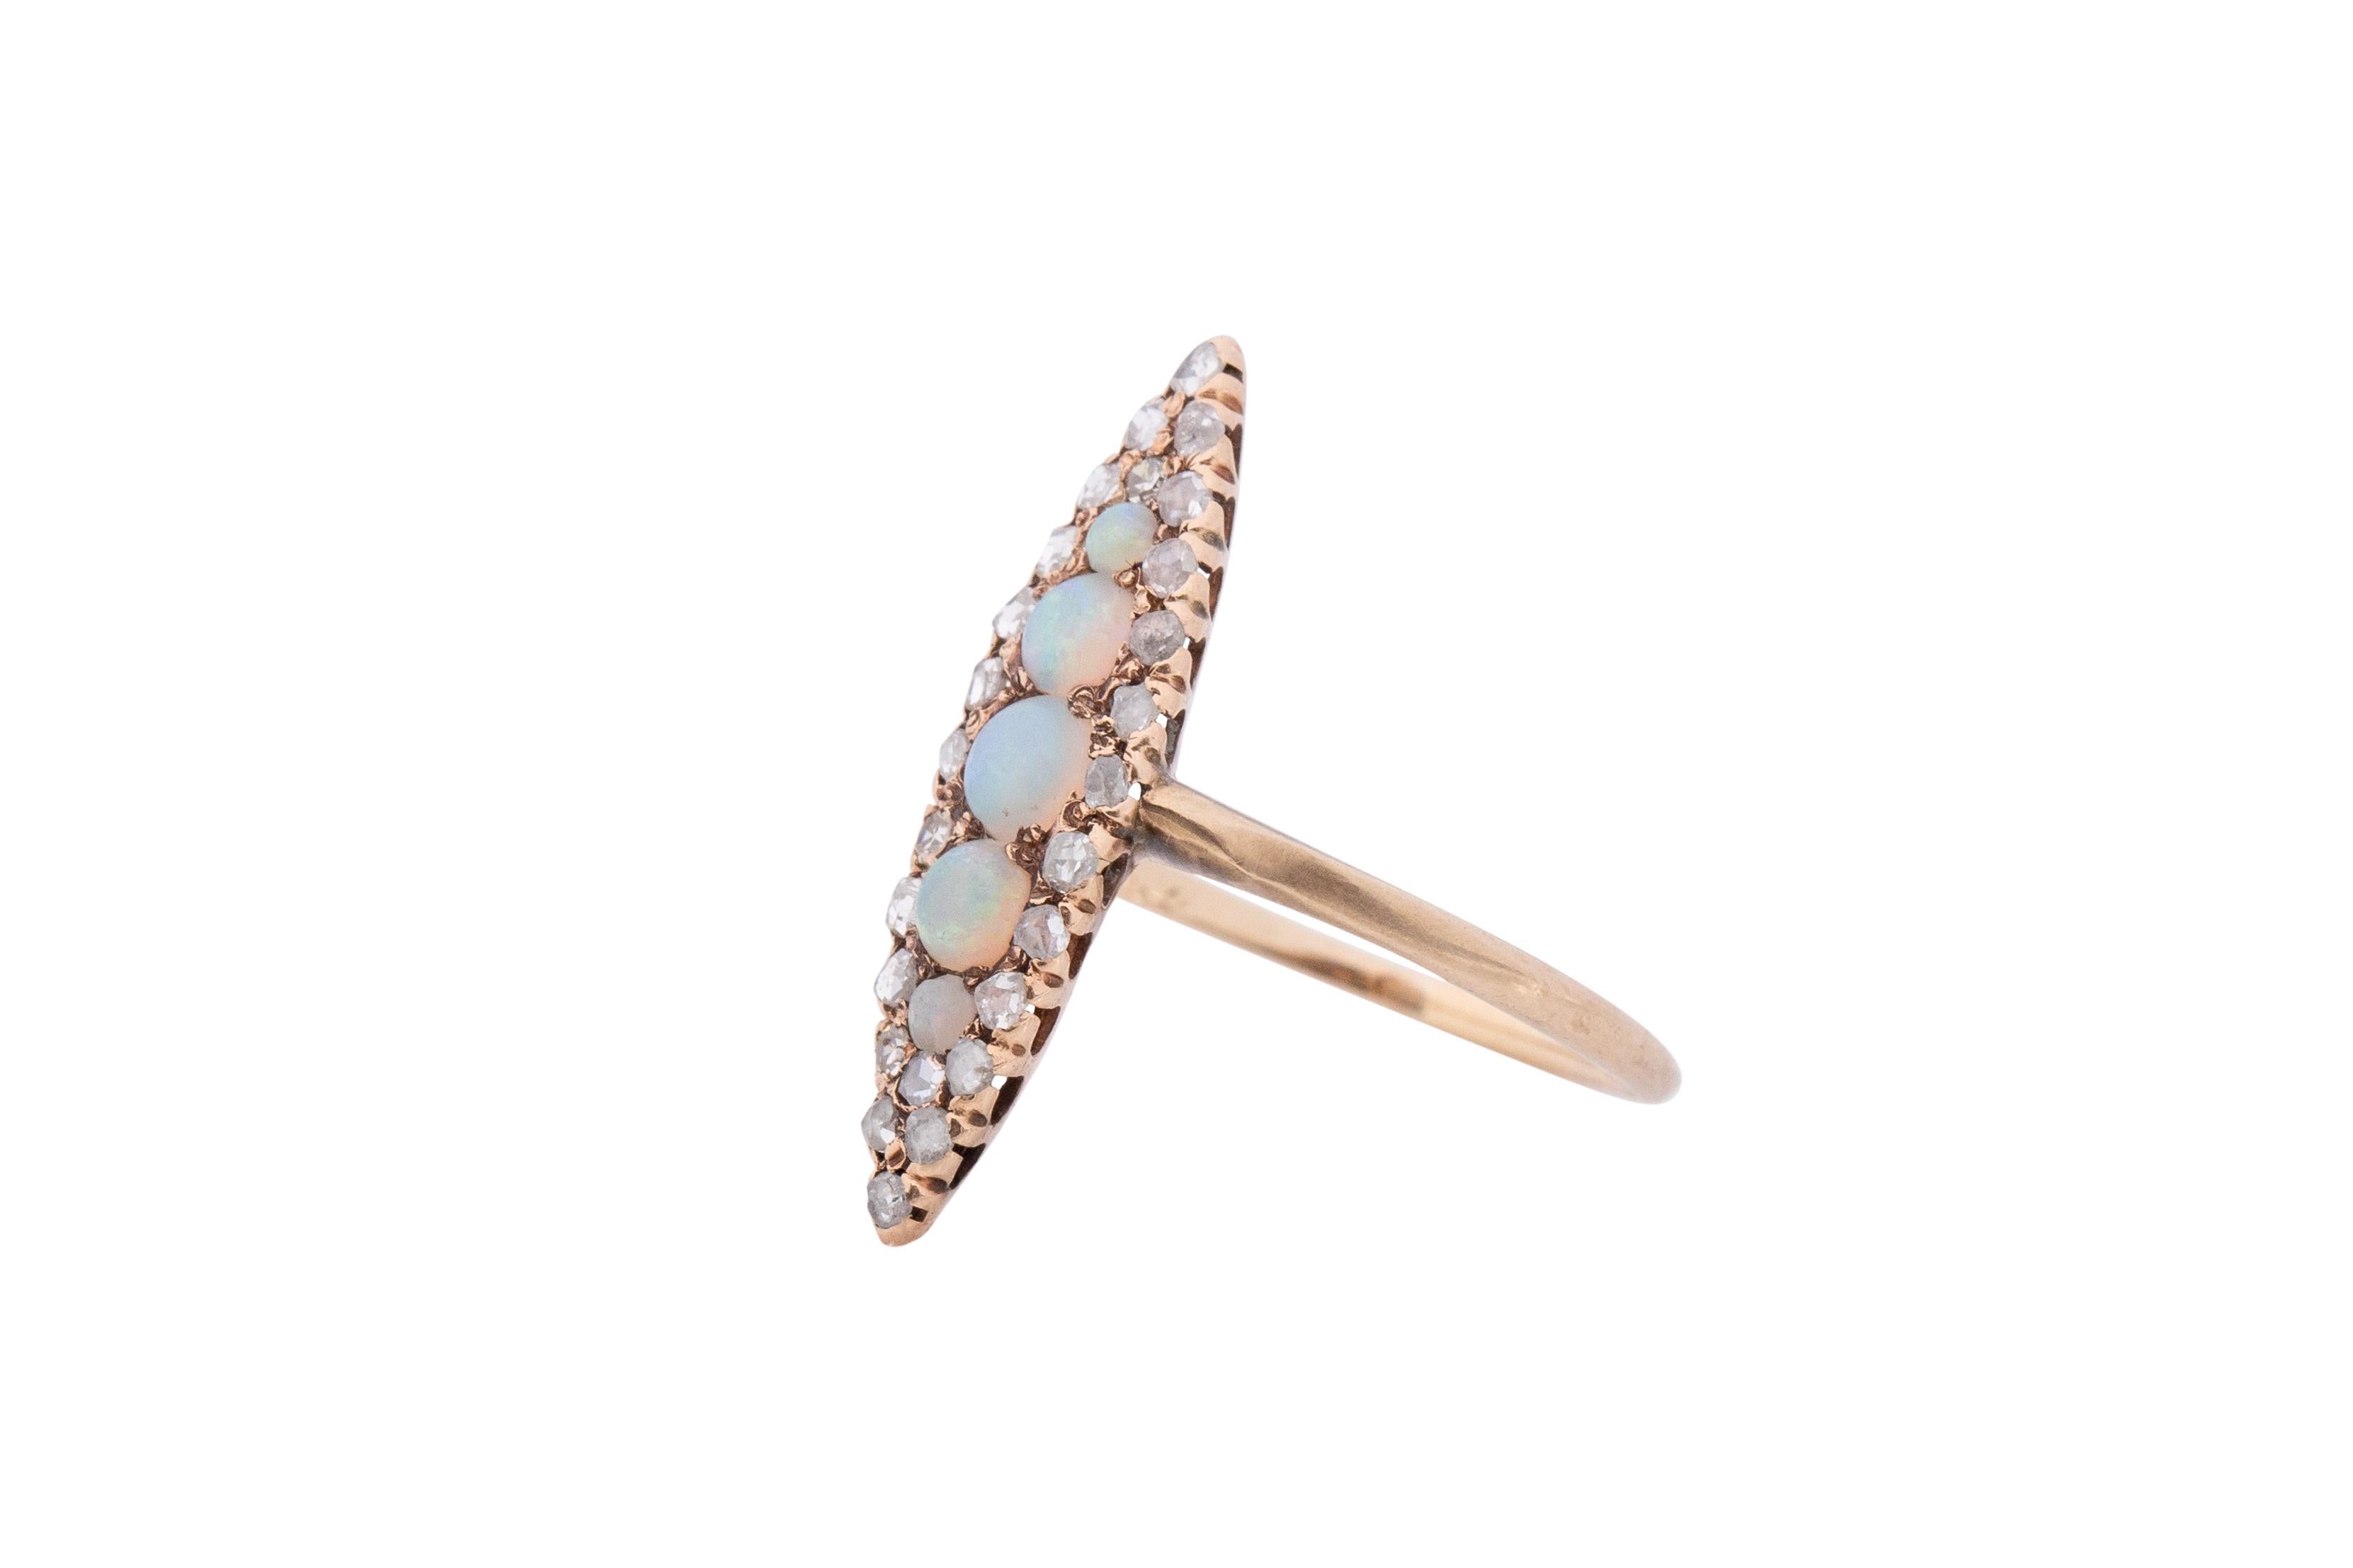 Item Details: 
Ring Size: 7.25
Metal Type: 14 karat Rose Gold [Hallmarked, and Tested]
Weight: 1.9 grams

Diamond Details:
Weight: .25 carat total weight
Cut: Antique Rose Cut
Color: Mixed, J-K-L
Clarity: SI

Opal Details:
Weight: .60 carat total